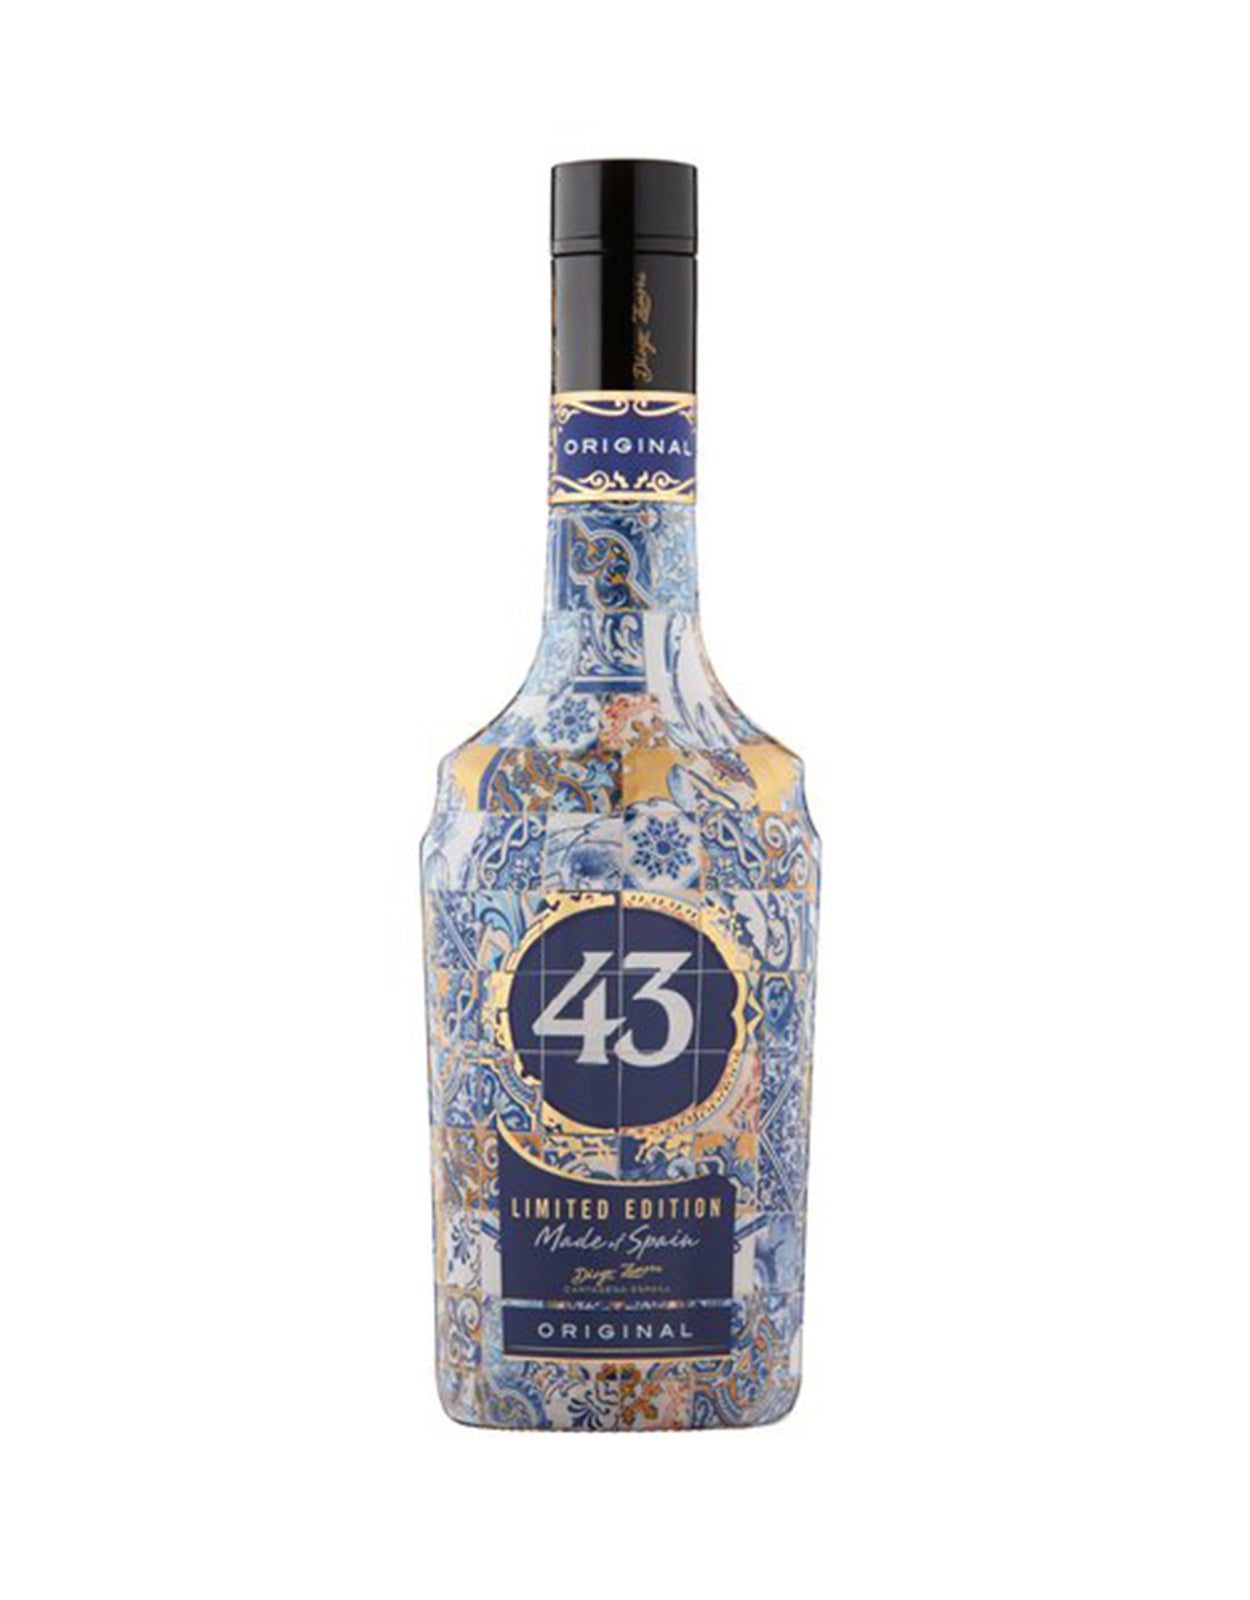 Purchase Licor 43 Horchata Liquor Online - Low Prices